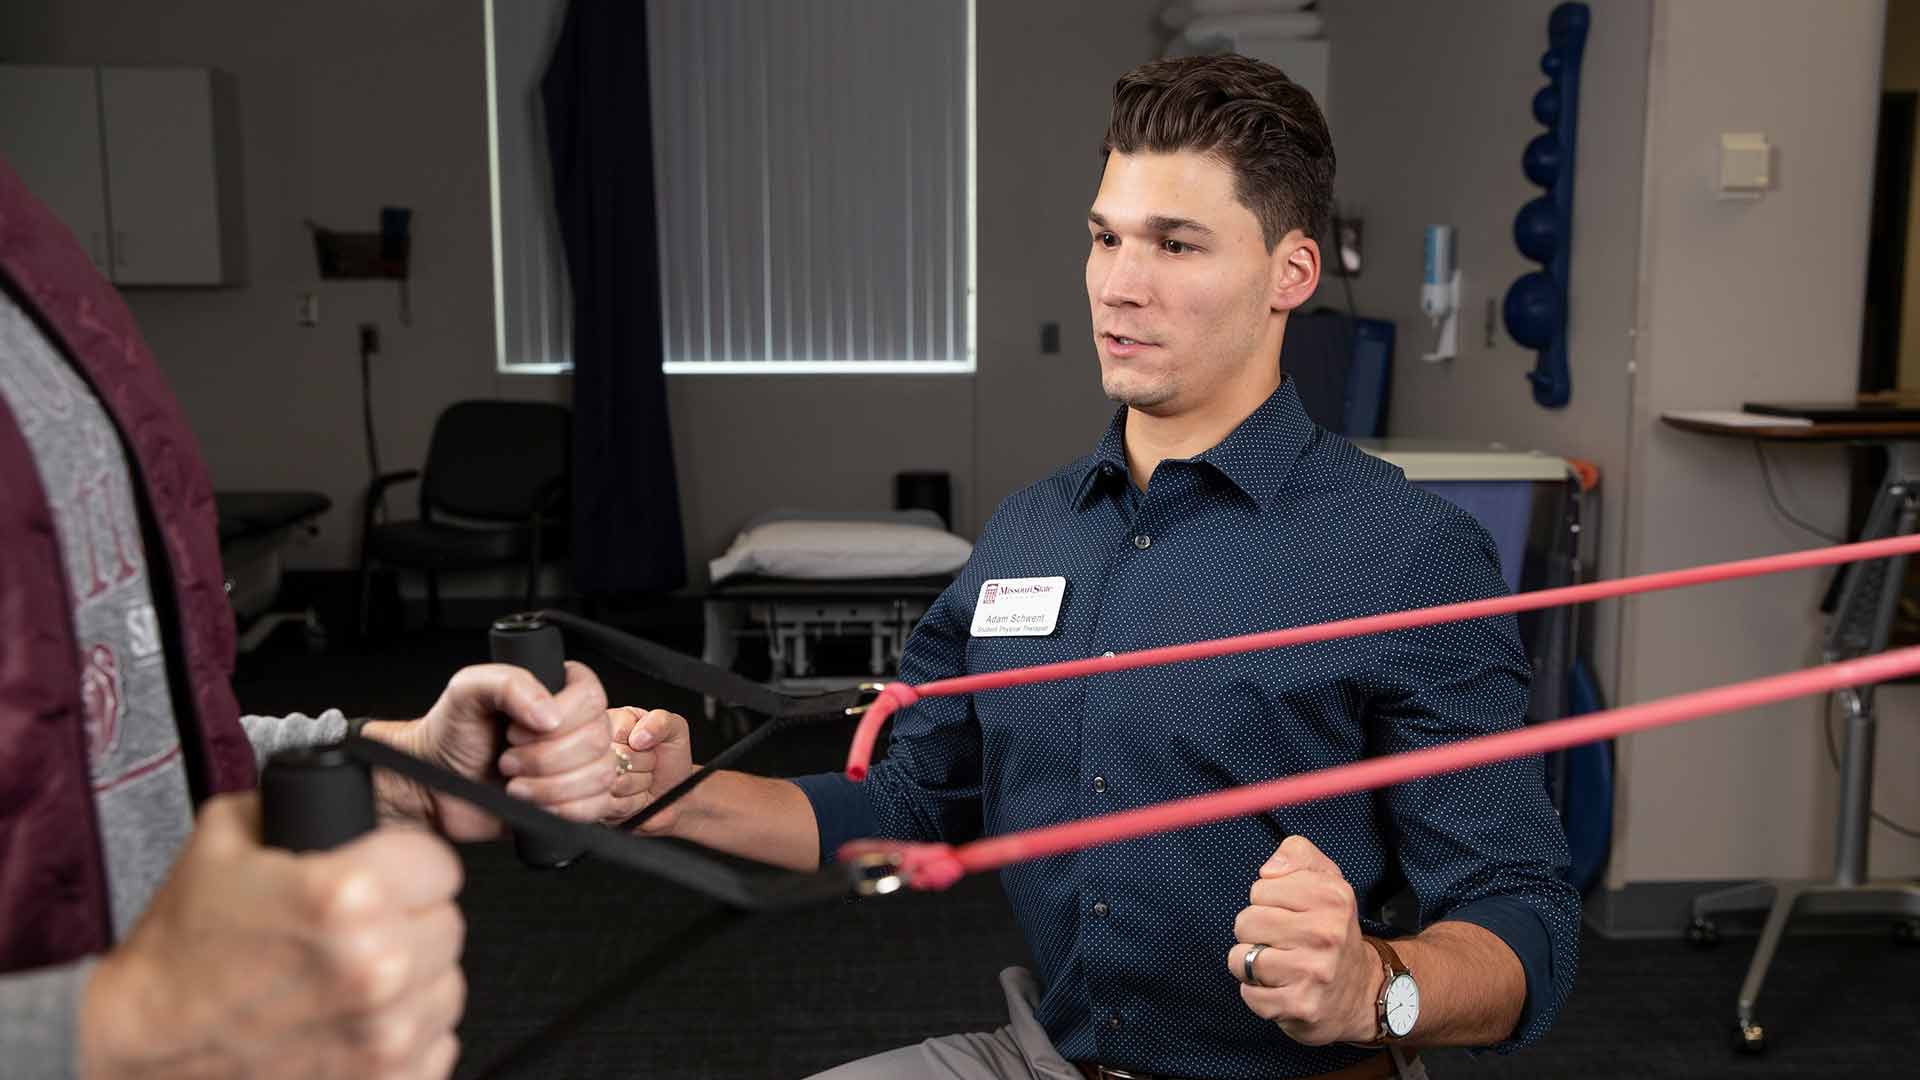 A physical therapy student instructs a client on how to use a pulley machine.